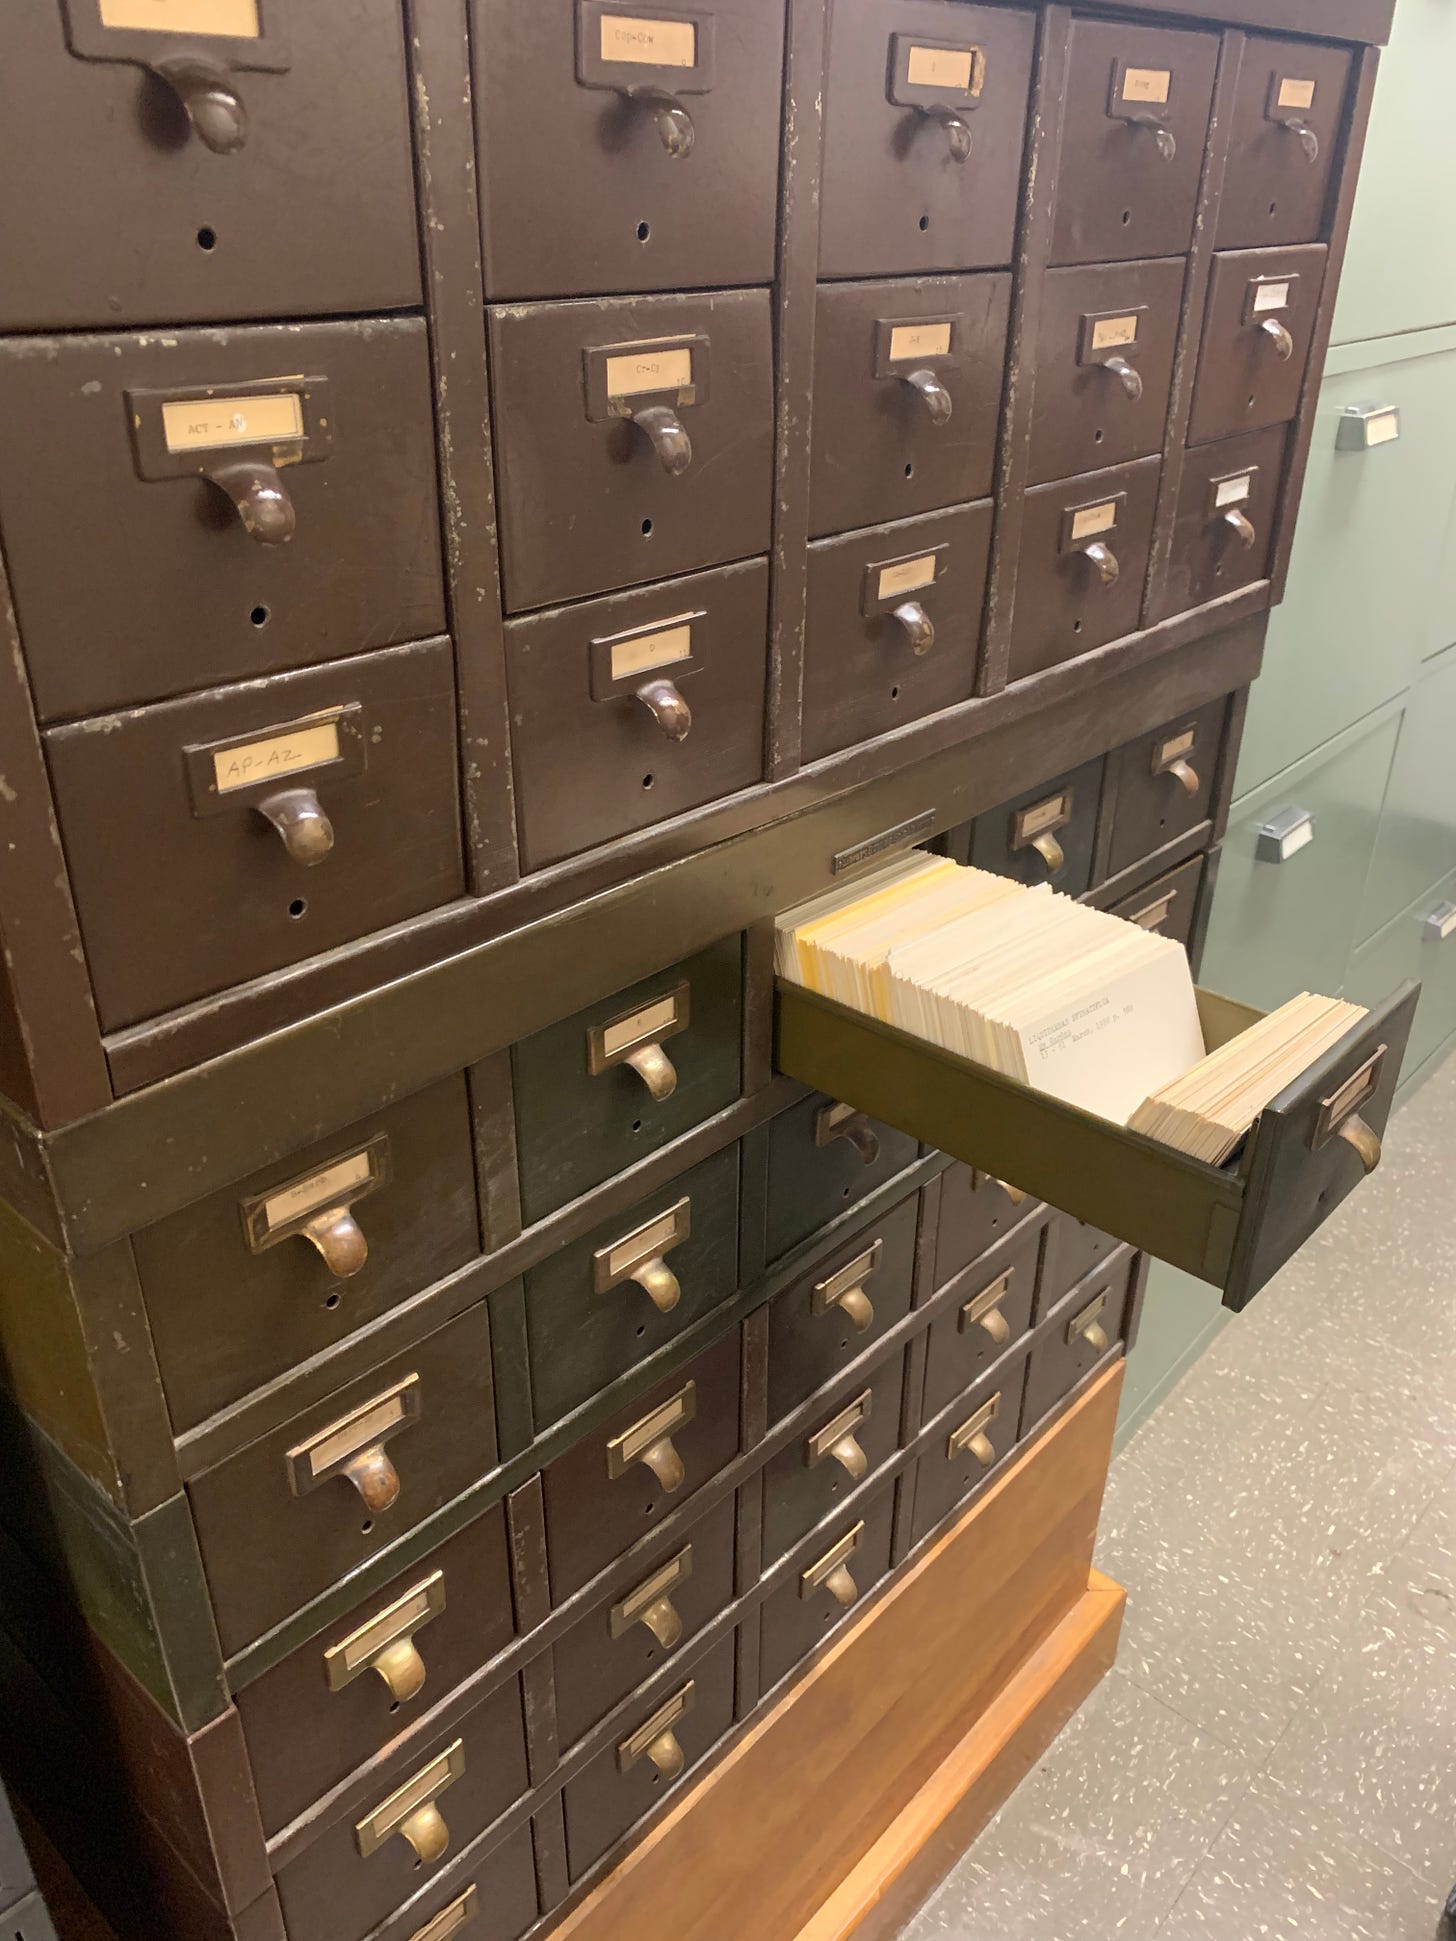 A brown cabinet with yellowed labels on the front of each drawer. A drawer is pulled open and is filled with index cards.